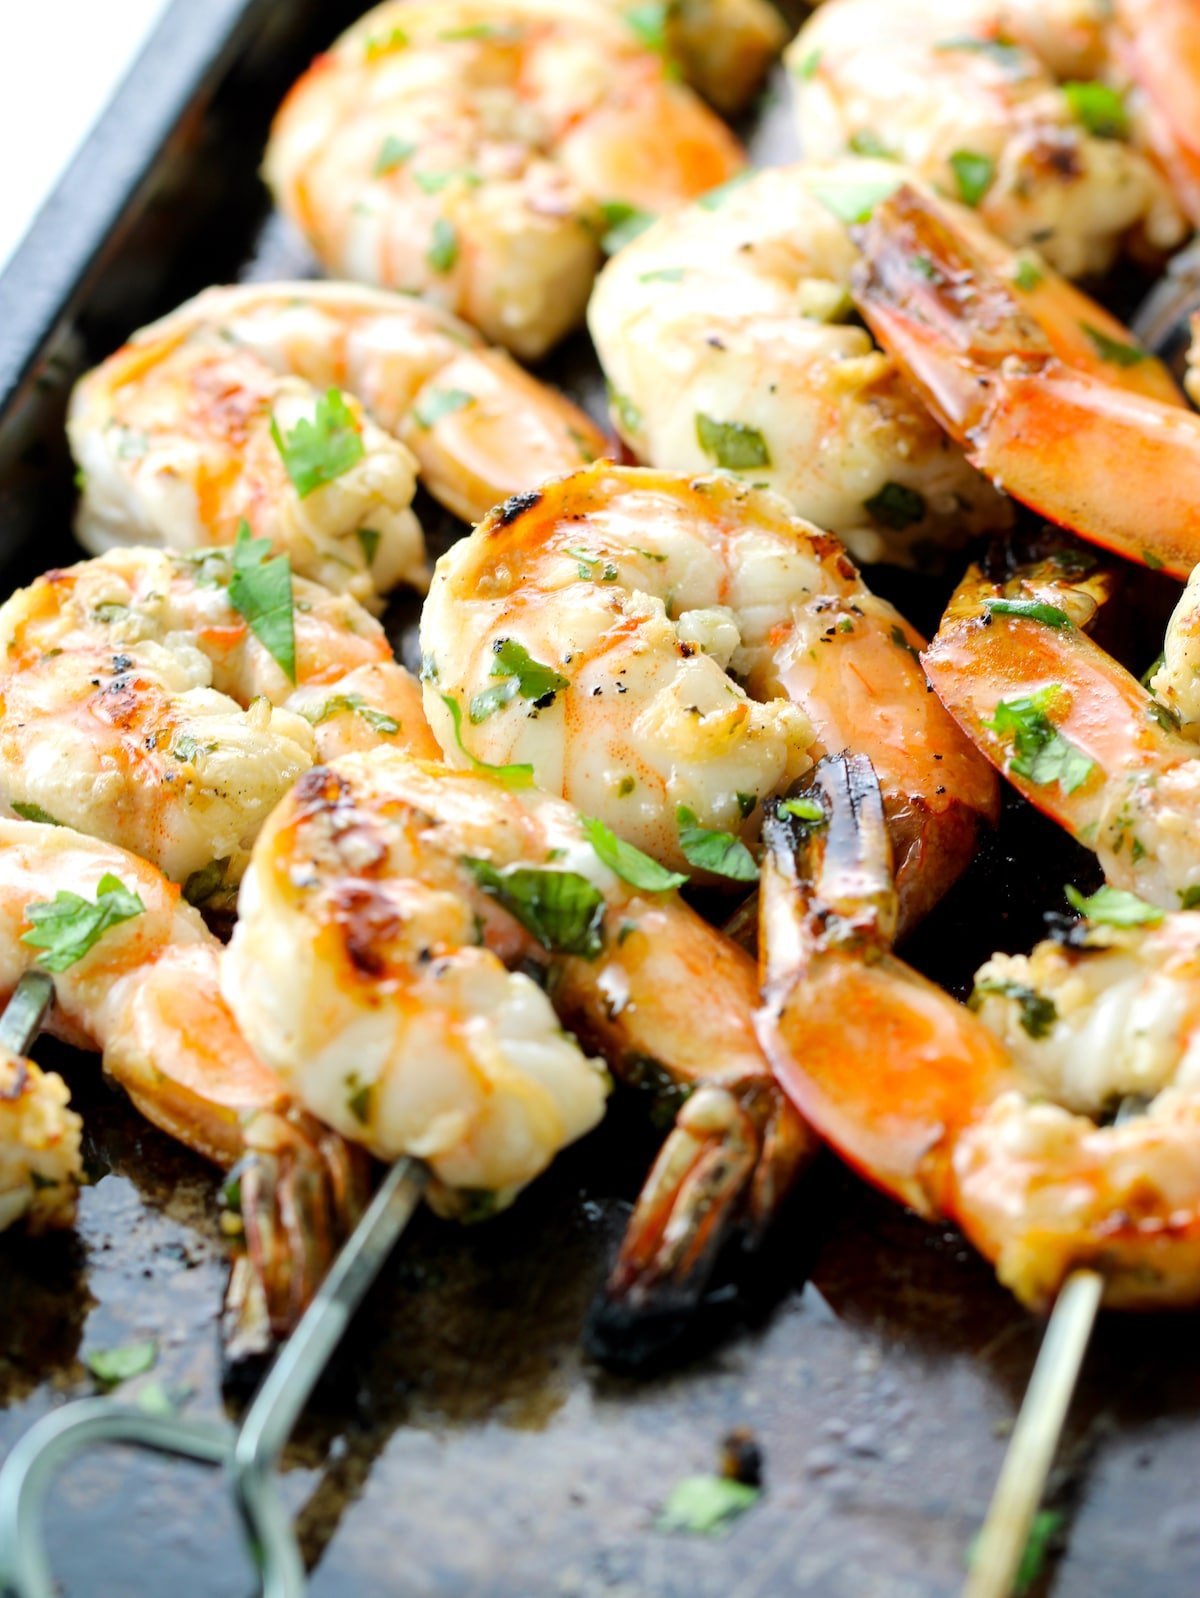 A close-up photo of grilled shrimp.